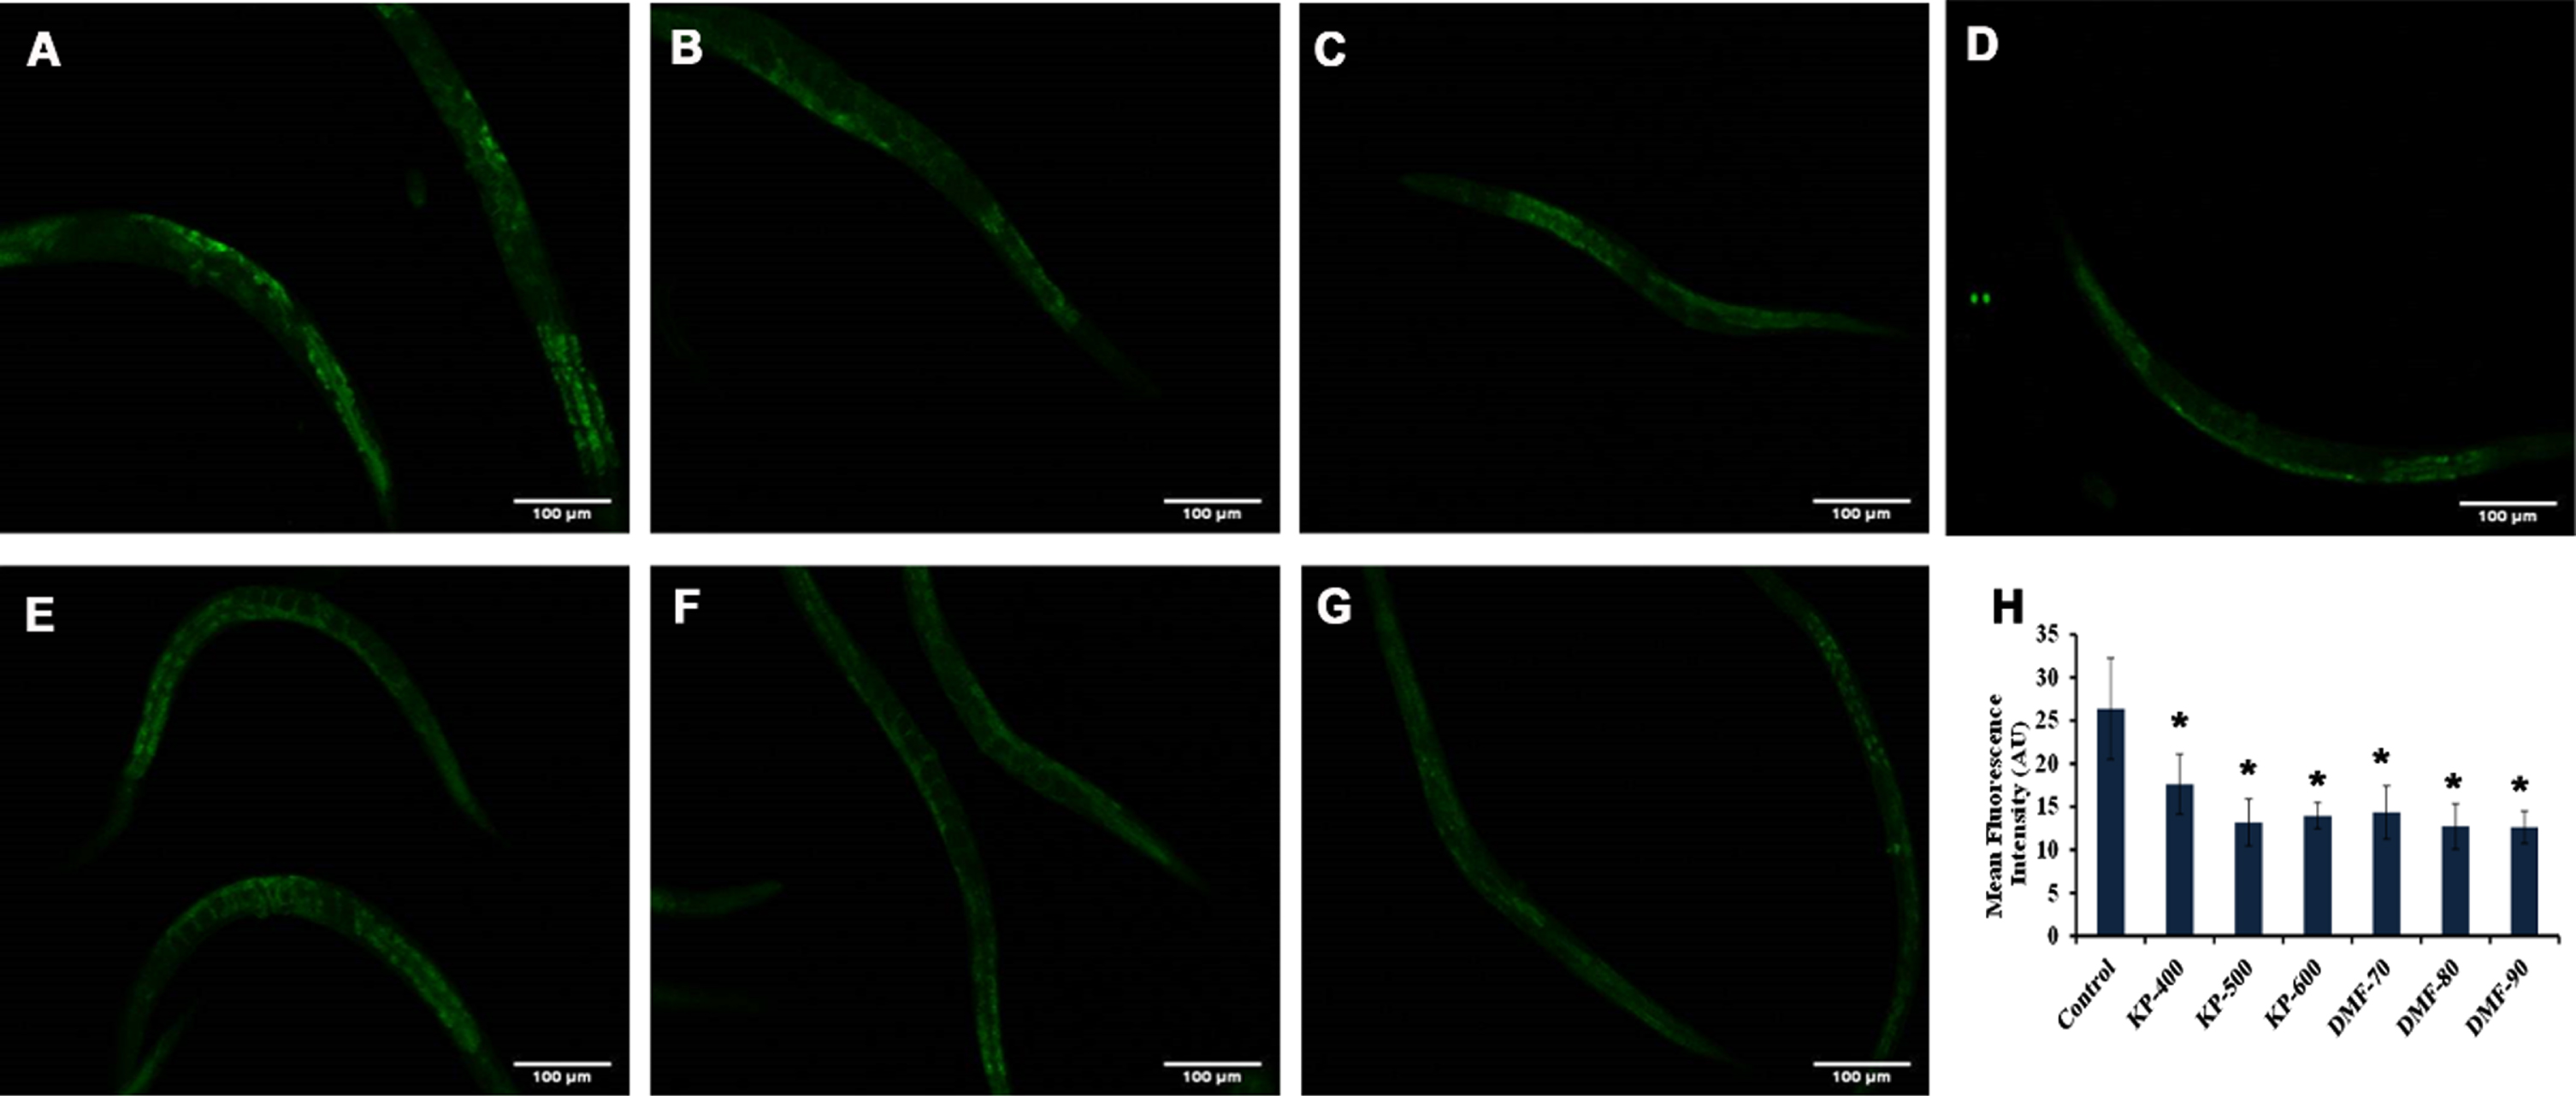 Effect of KP and DMF on the aging marker lipofuscin in N2 nematodes. (A) Control (B) KP-400μg/ml (C) KP-500μg/ml (D) KP-600μg/ml (E) DMF-70μM (F) DMF-80μM (G) DMF-90μM (H) Quantification of lipofuscin fluorescence intensity in N2 worms treated with different concentrations of KP and DMF. All the tested concentrations exhibited significant (p <  0.05; control vs treated; n = 10) reduction in lipofuscin levels.